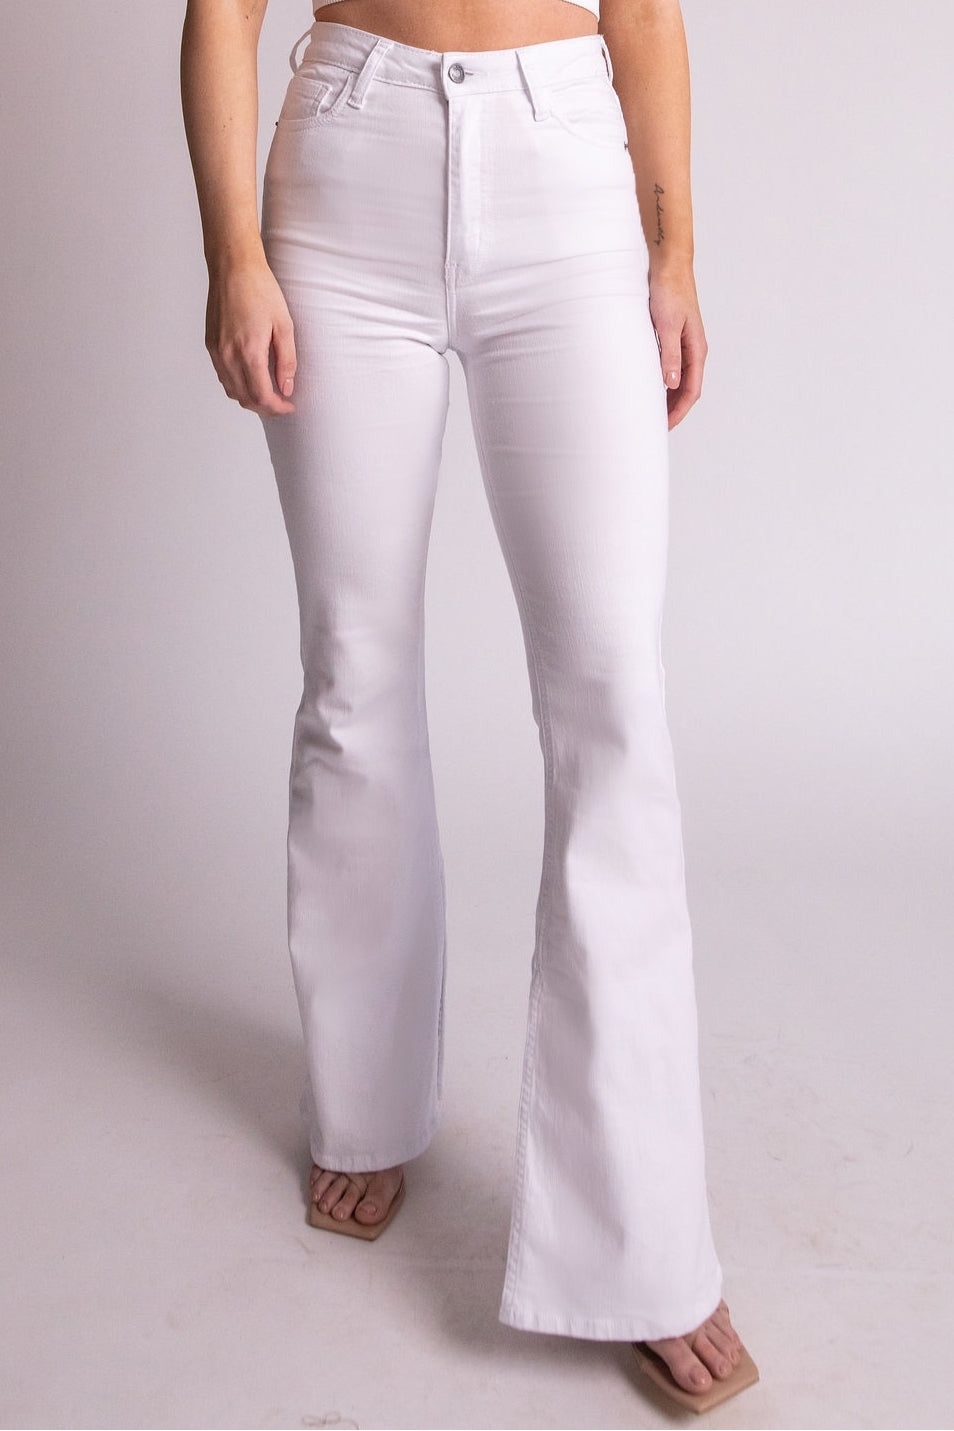 The Retro White High Rise Long Slit Flare - Expressive Collective CO.